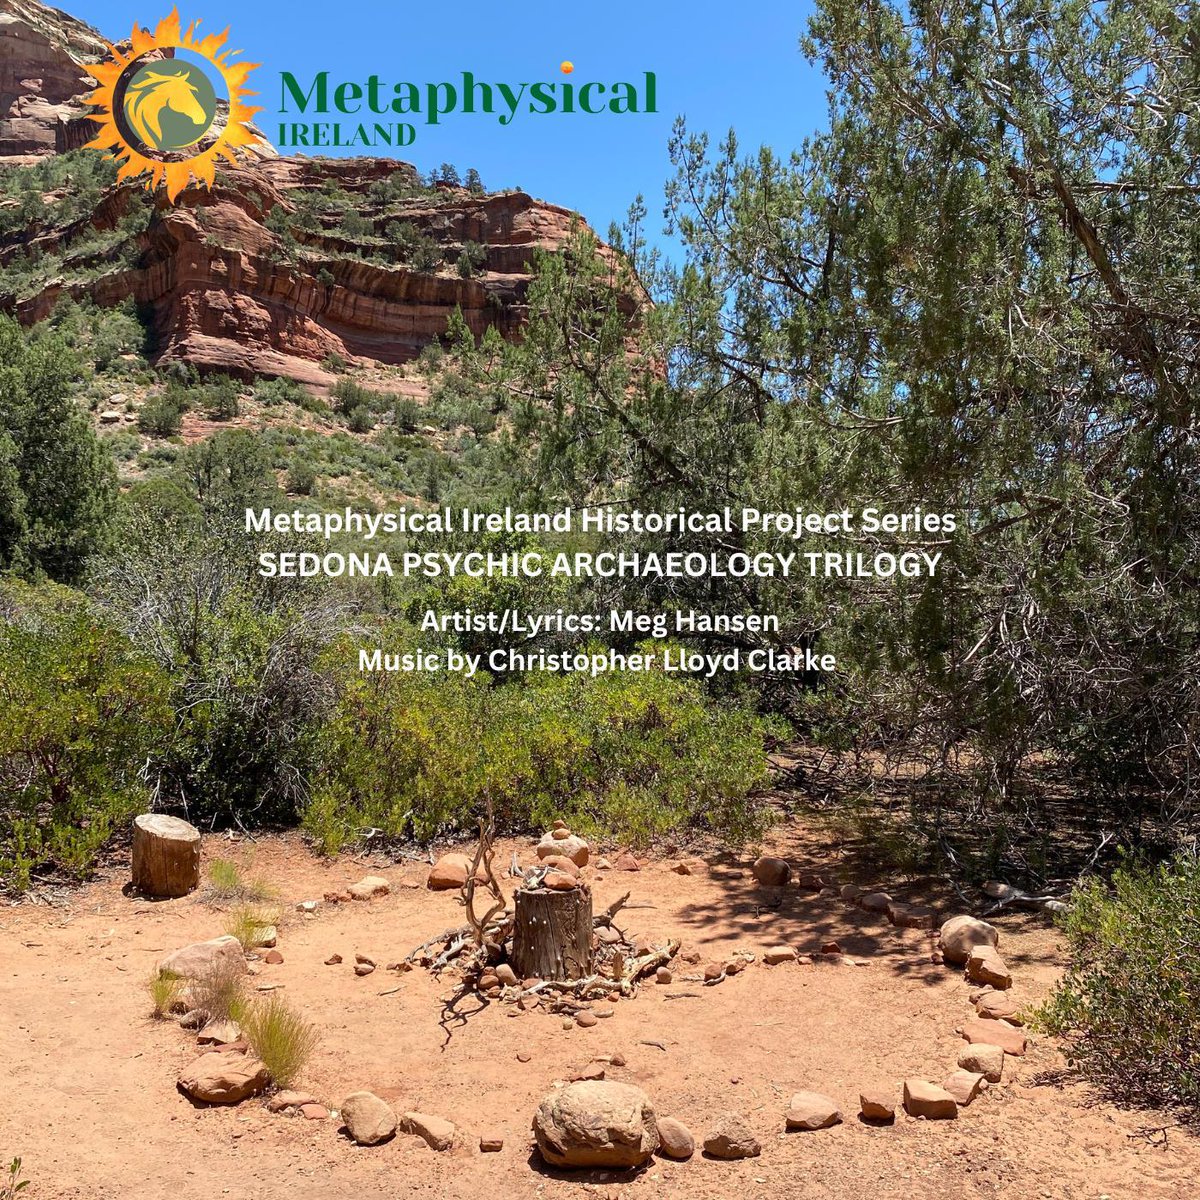 COMING JULY 18
On all major digital music networks
#MetaphysicalIreland Historical Project Series 
#sedonaarizona #USA

#PsychicArchaeology Trilogy: #PastLifeRegression, #SpiritCommunication via #AutomaticWriting & #RemoteViewing 
Follow your heart up the red rocks into a cave…